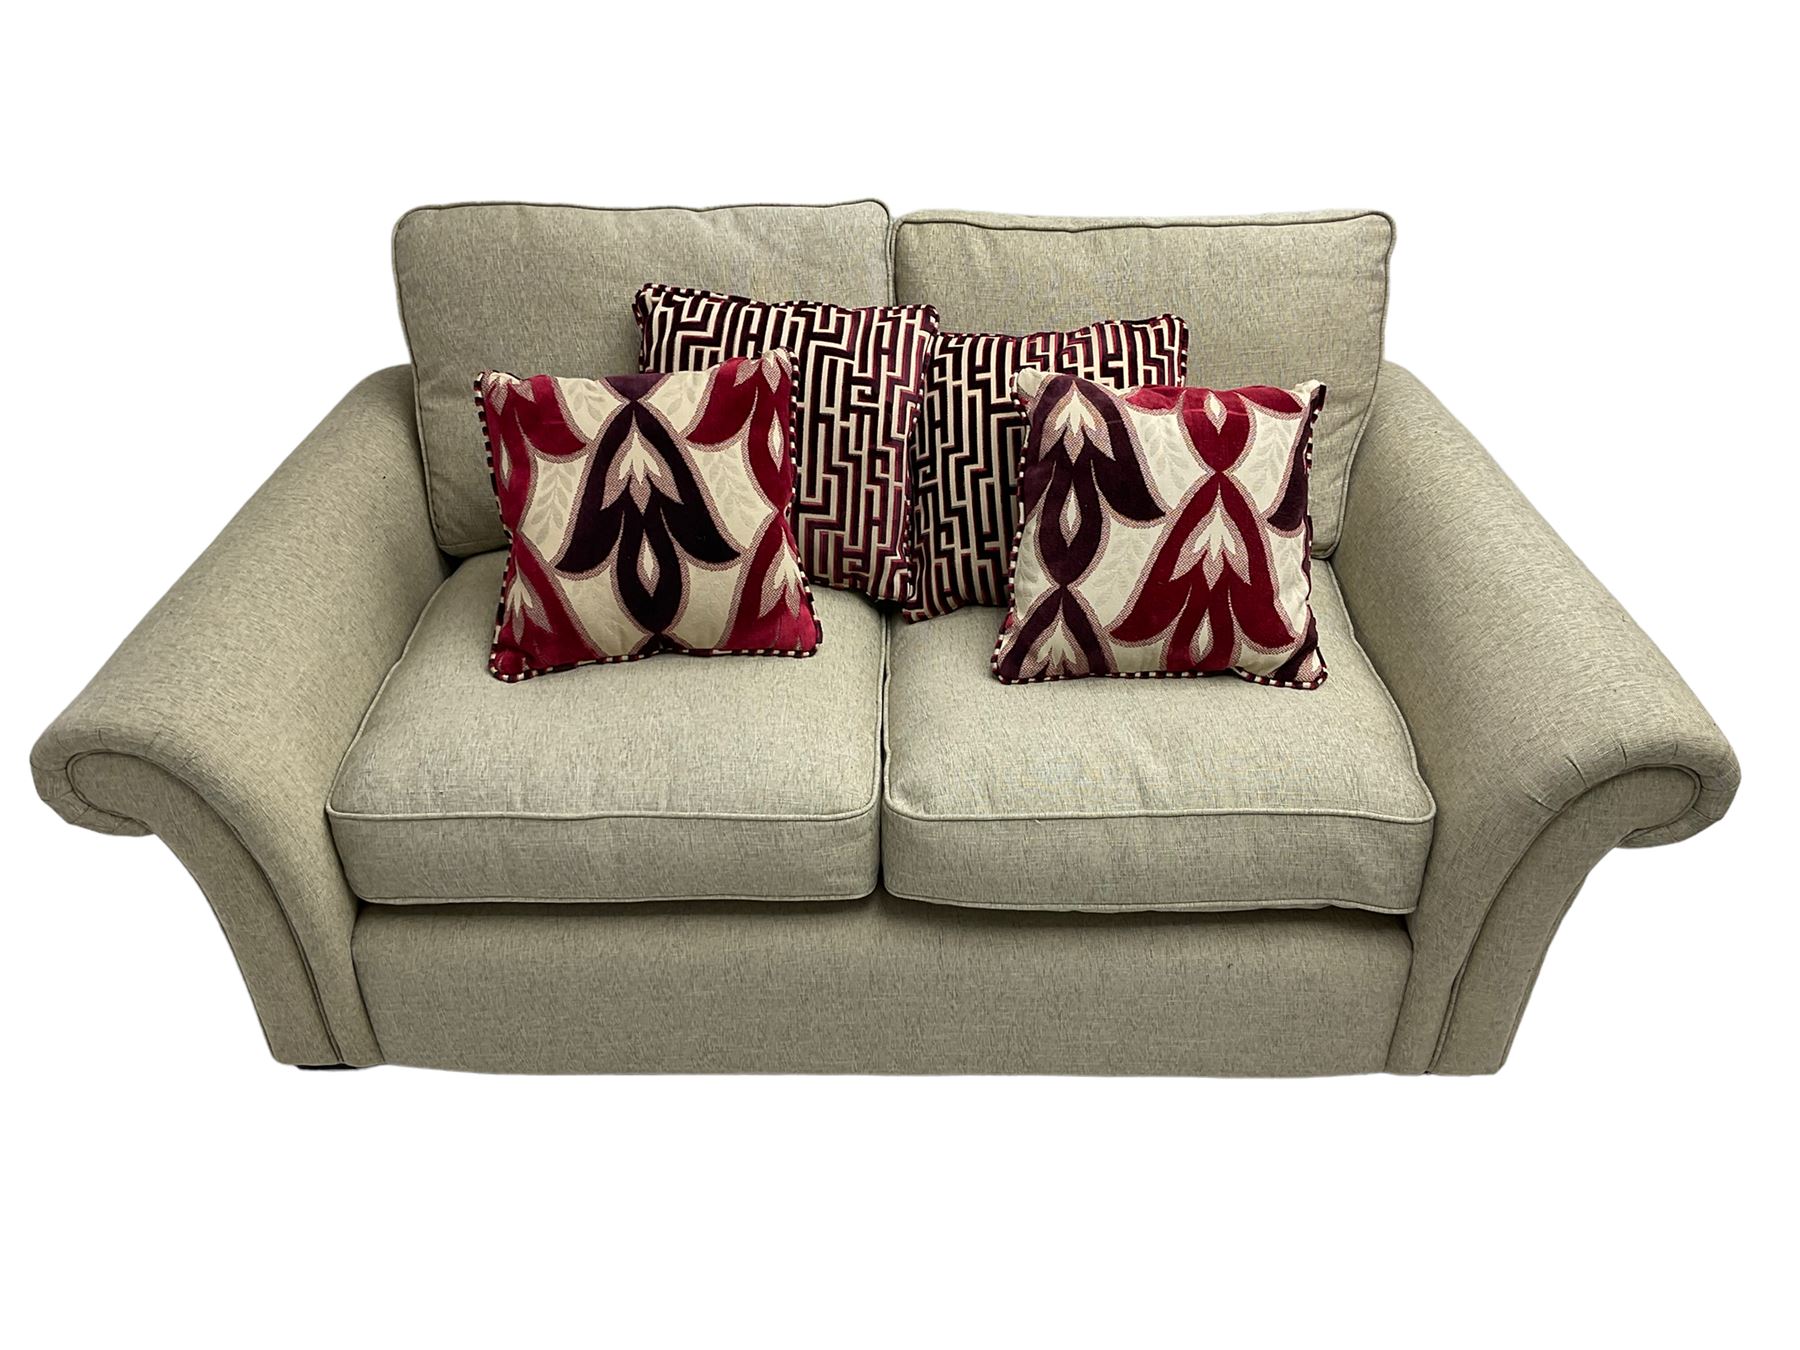 Two seater sofa - Image 3 of 6